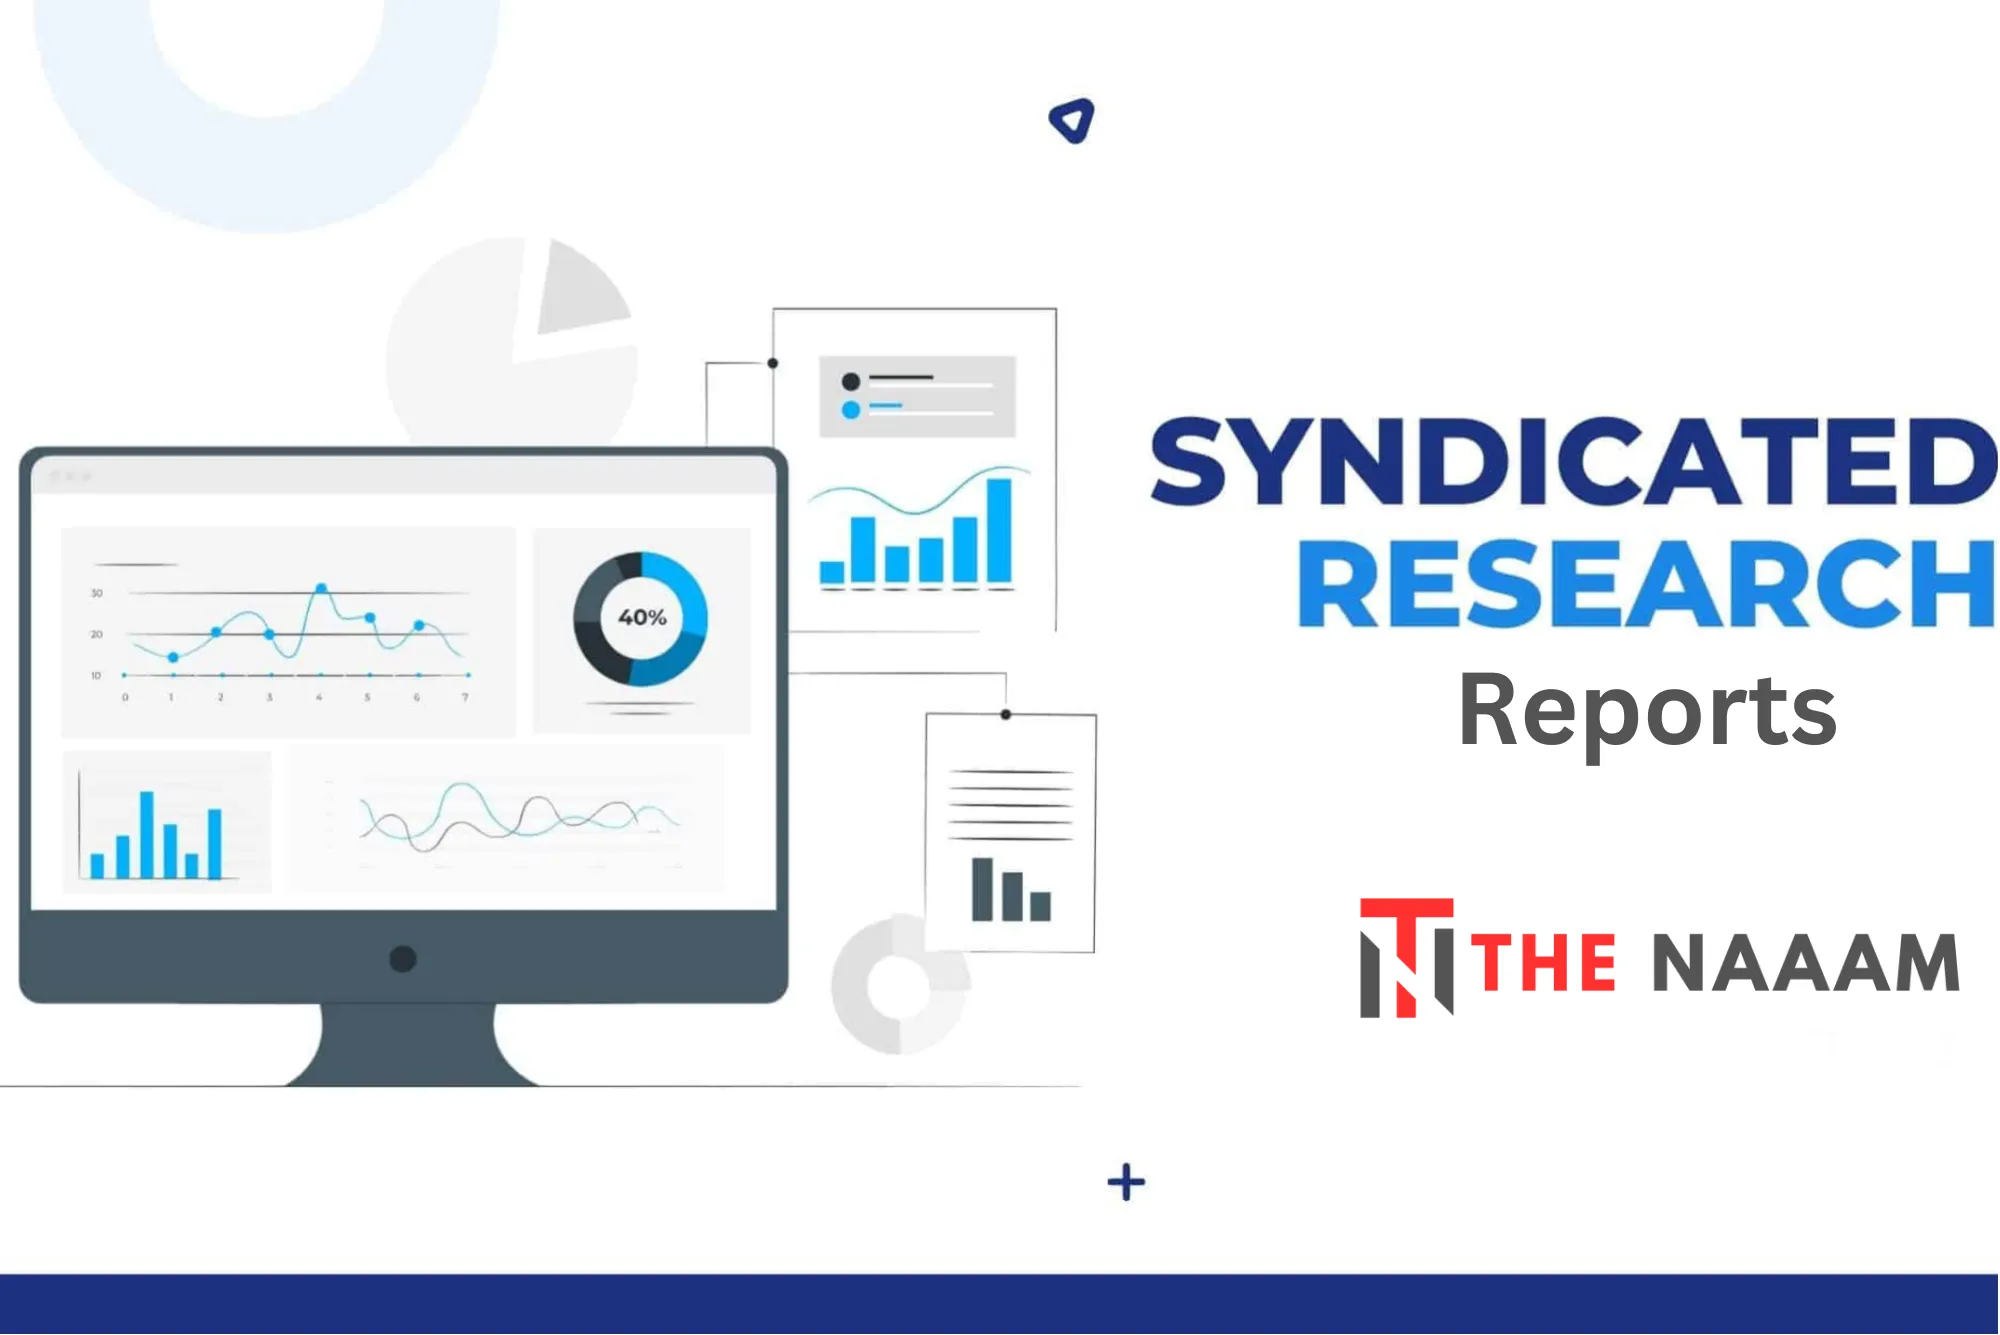 Syndicated Research Reports